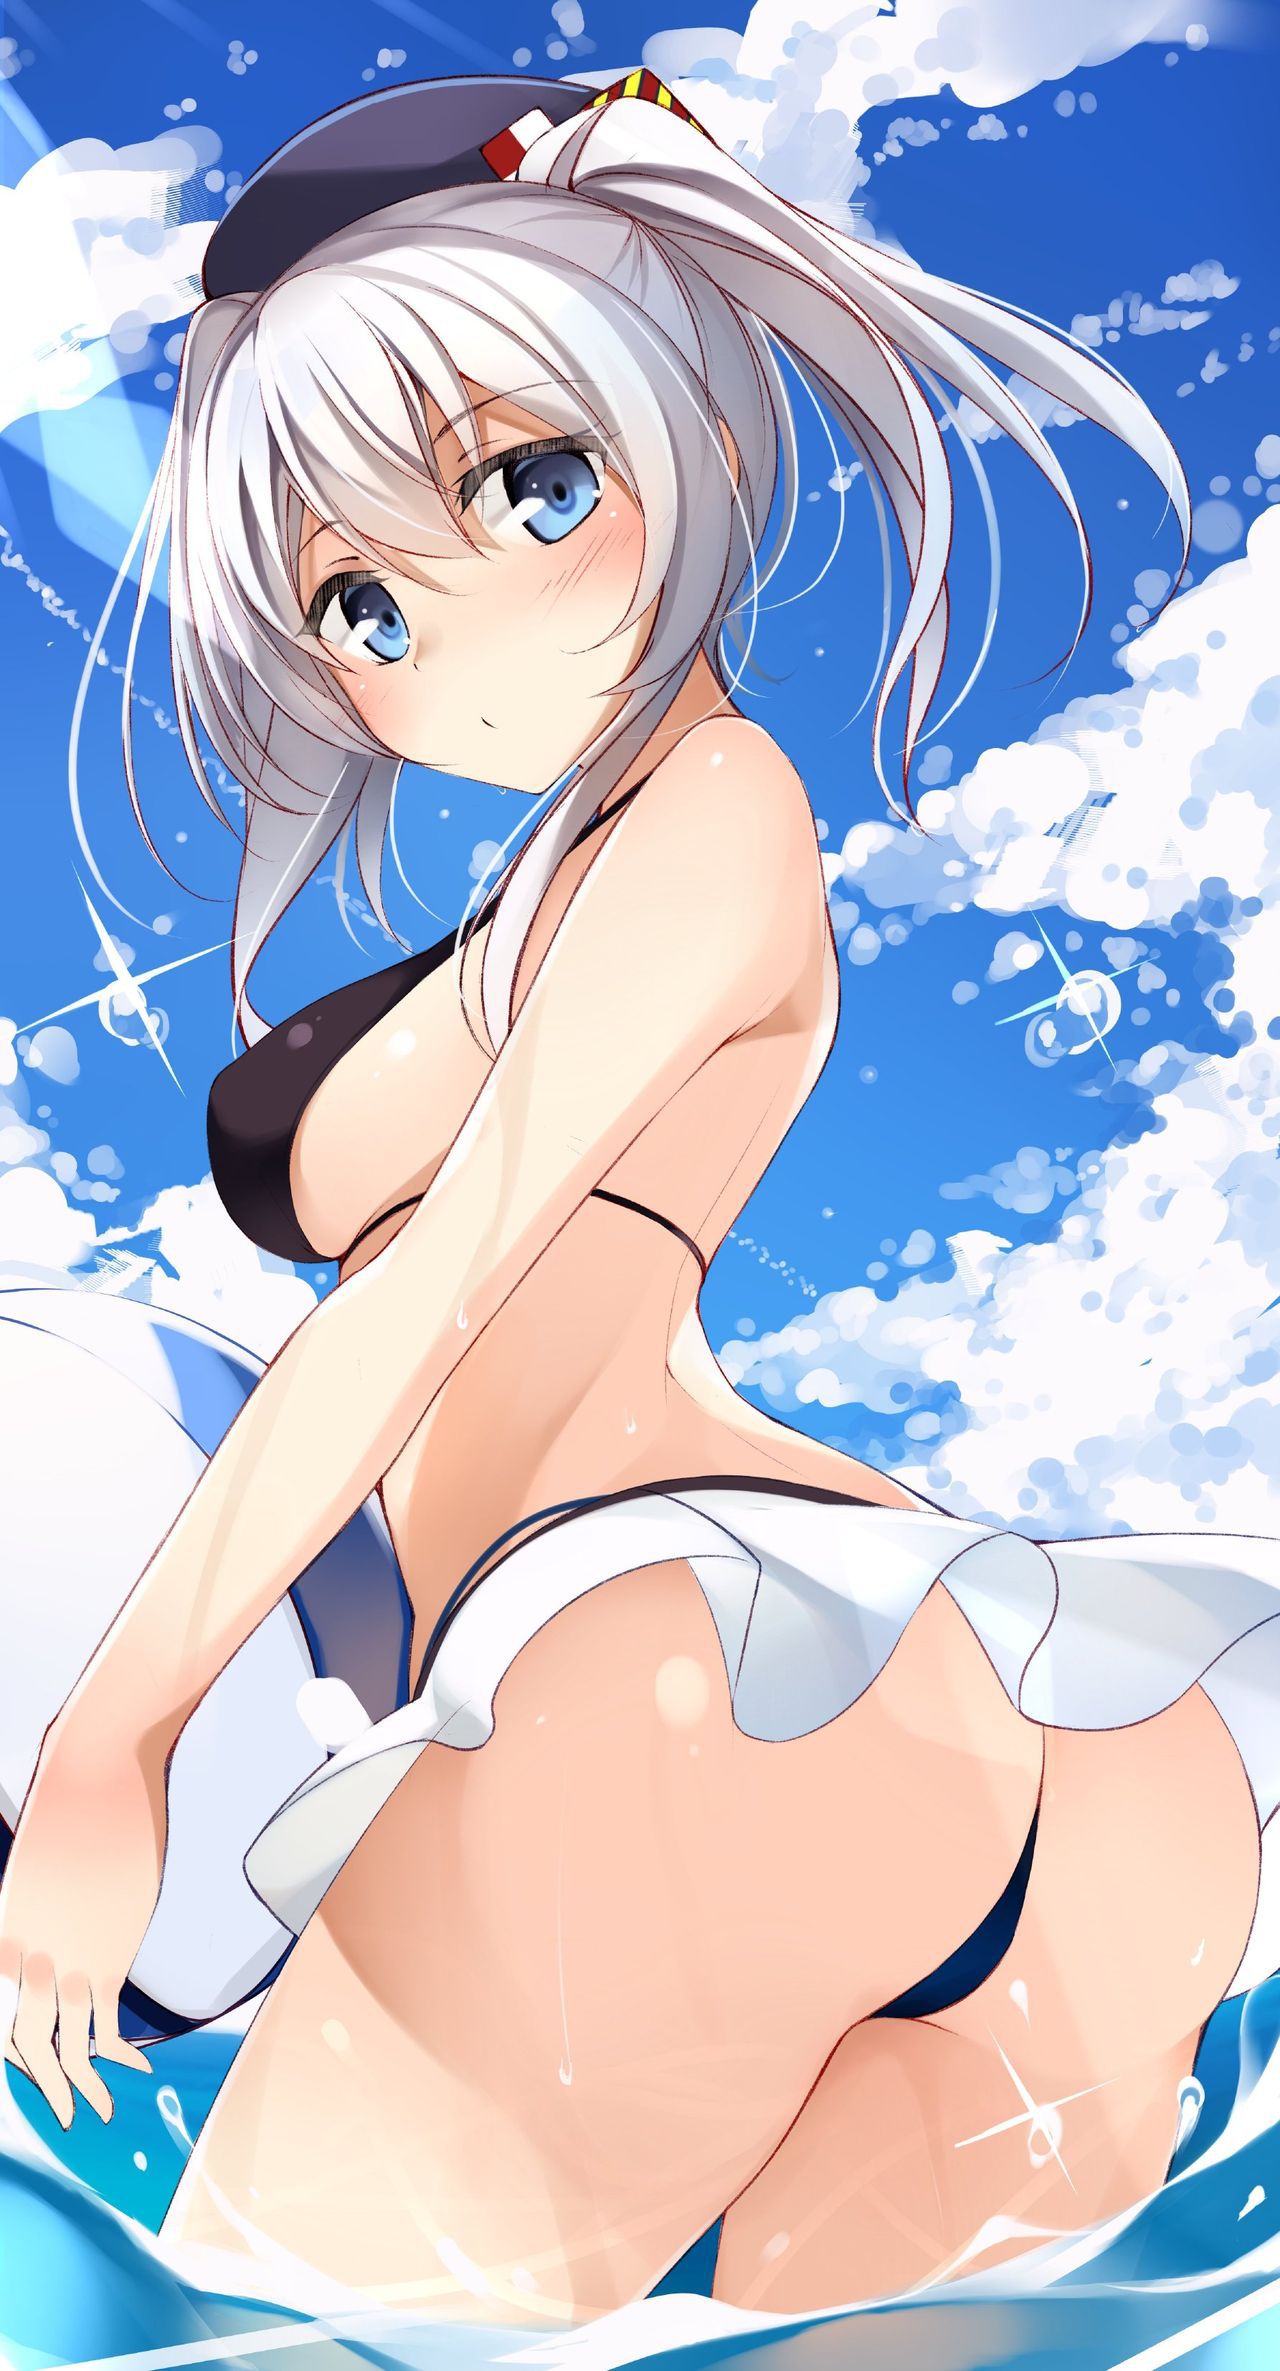 [2nd] Refreshing Blue sky is a beautiful secondary image 4 [non-erotic] 27